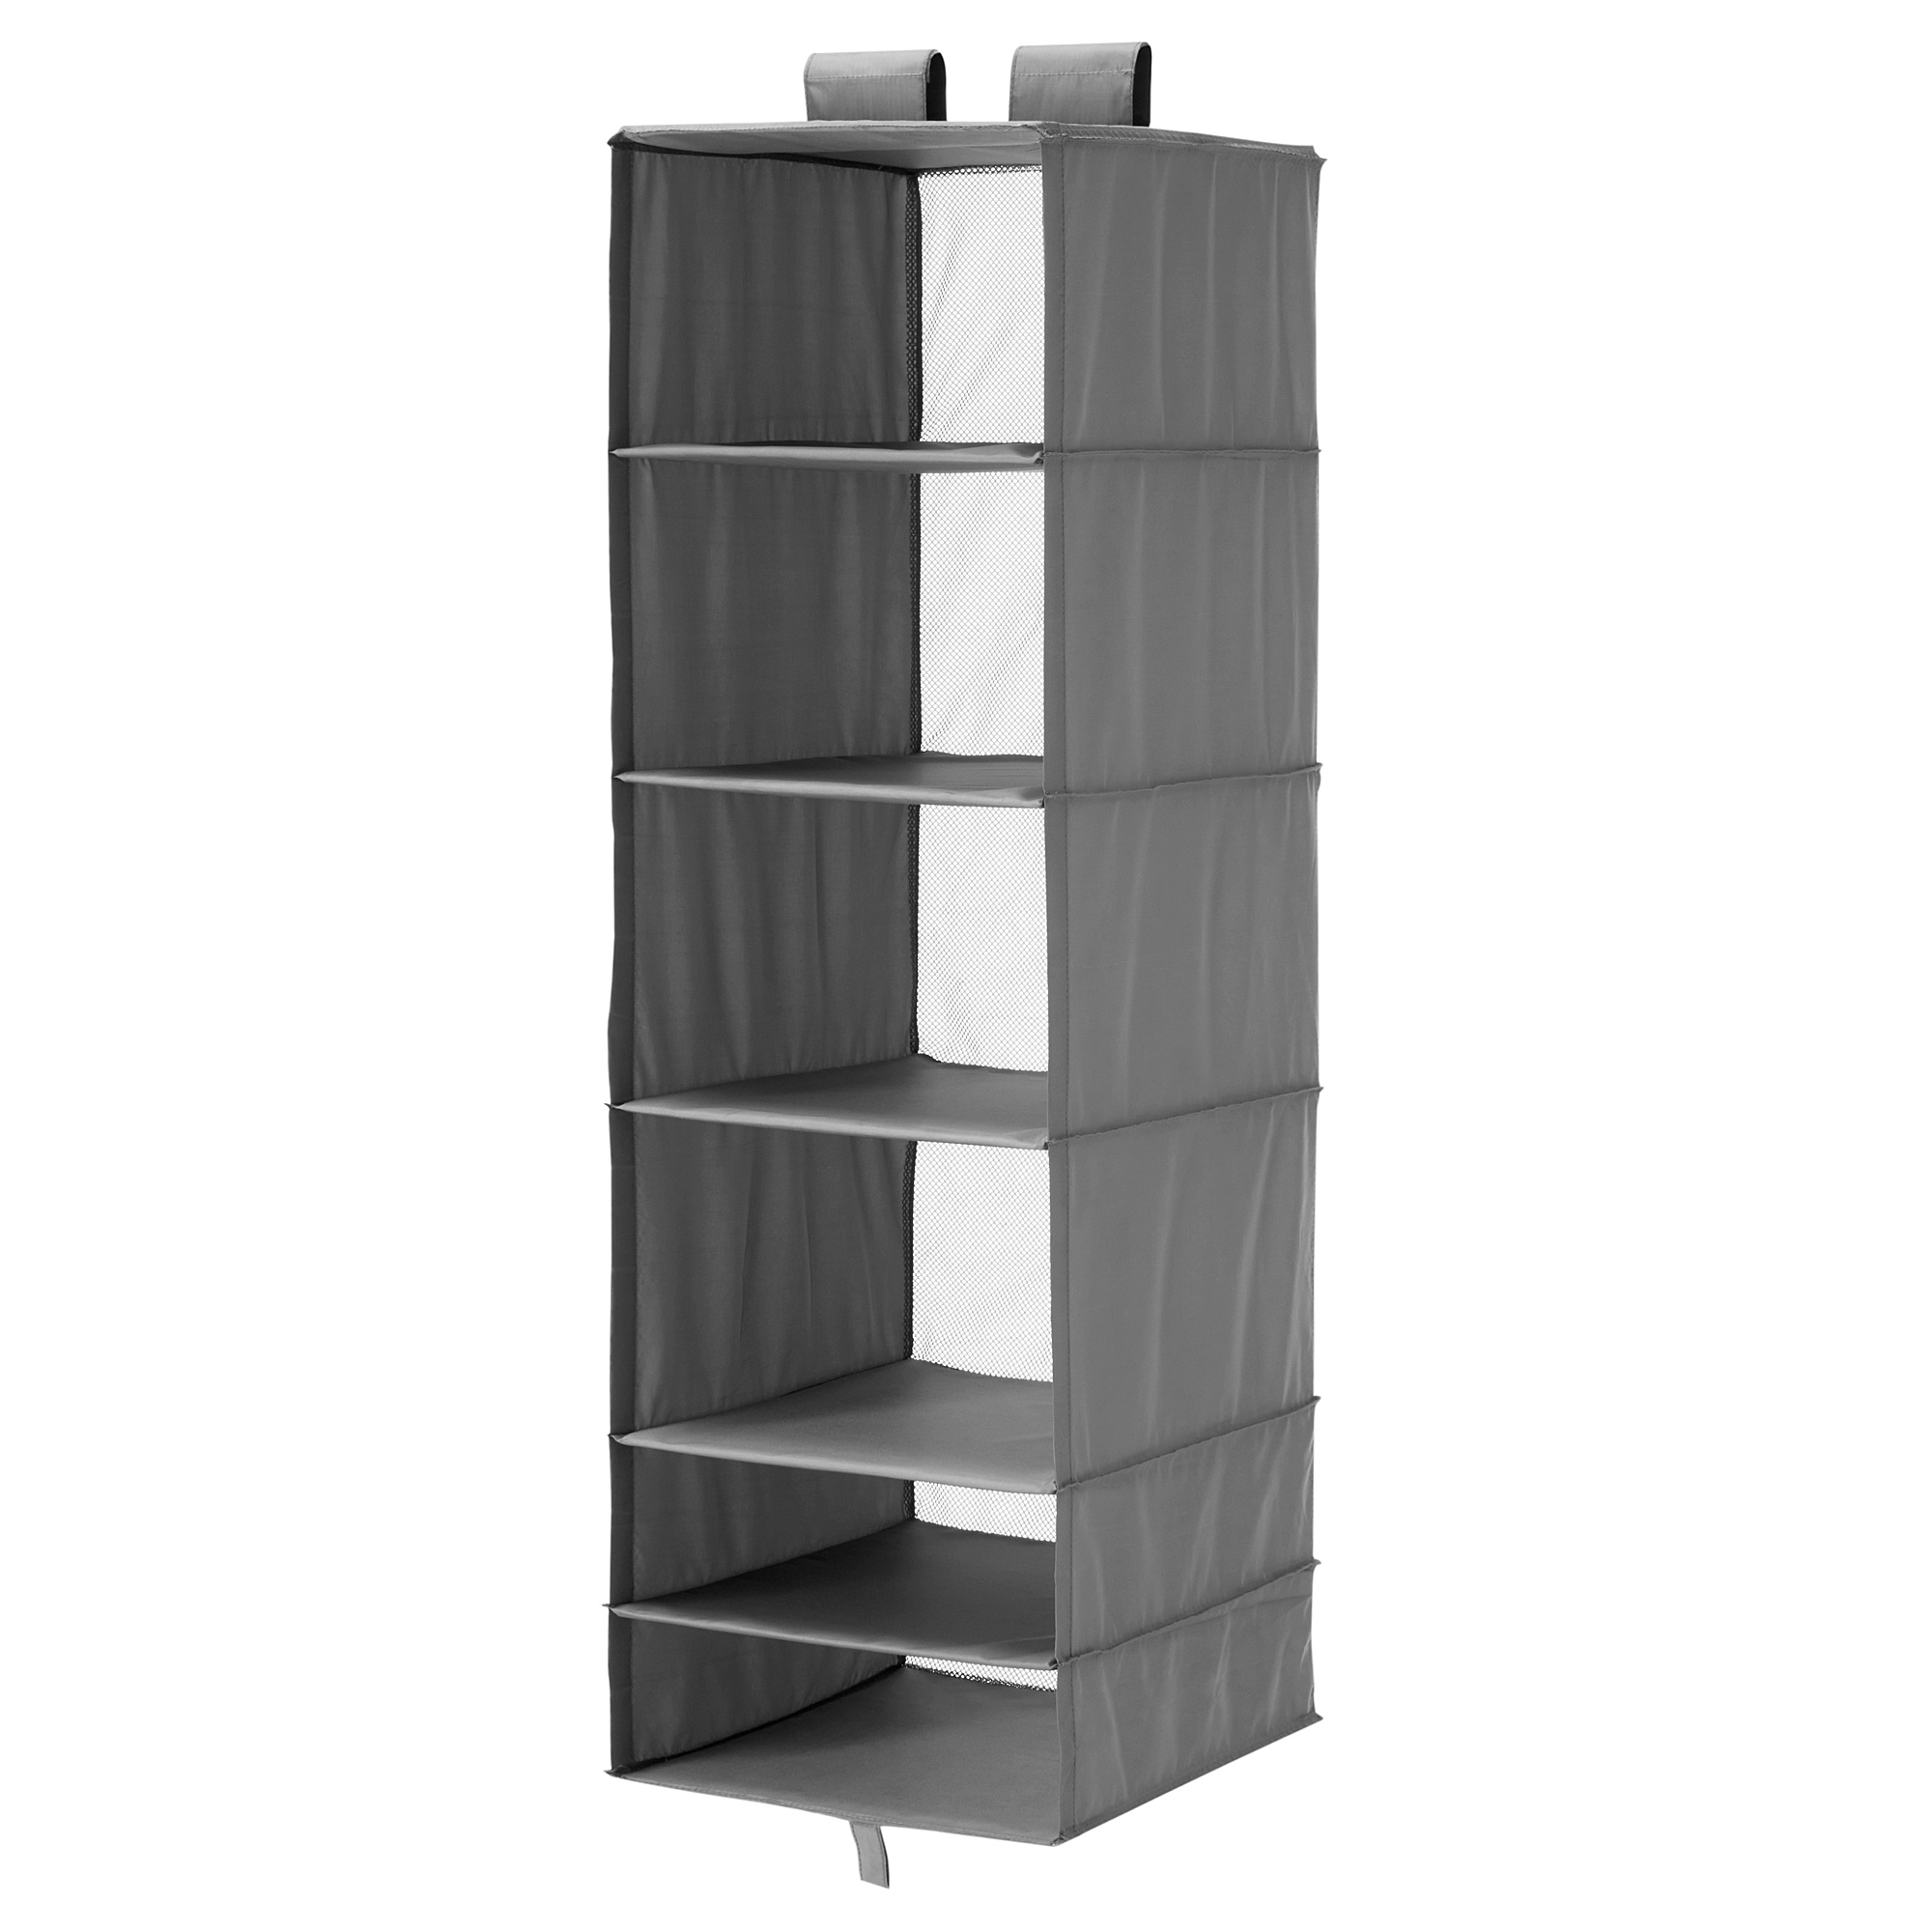 SKUBB storage with 6 compartments